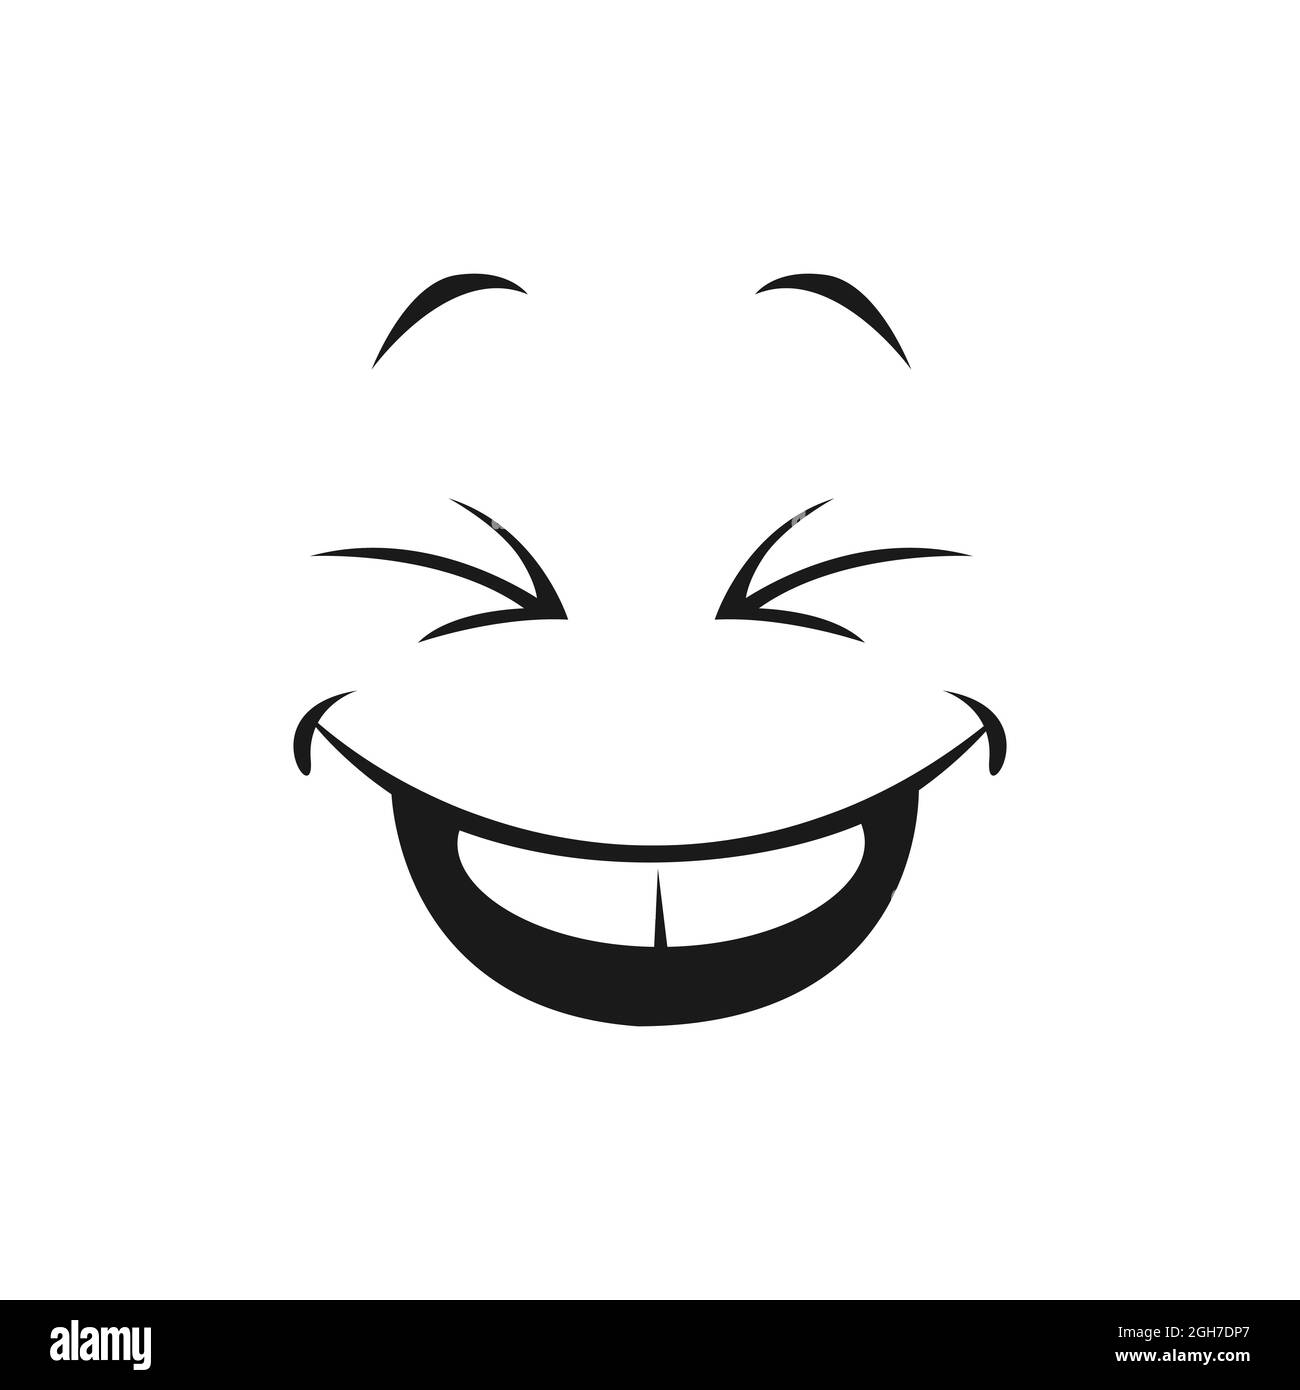 satisfied-emoji-laughing-head-with-blinked-eyes-and-open-mouth-world-smile-day-symbol-happy-smiley-with-laughing-mouth-emoticon-emoji-lol-expressi-2GH7DP7.jpg